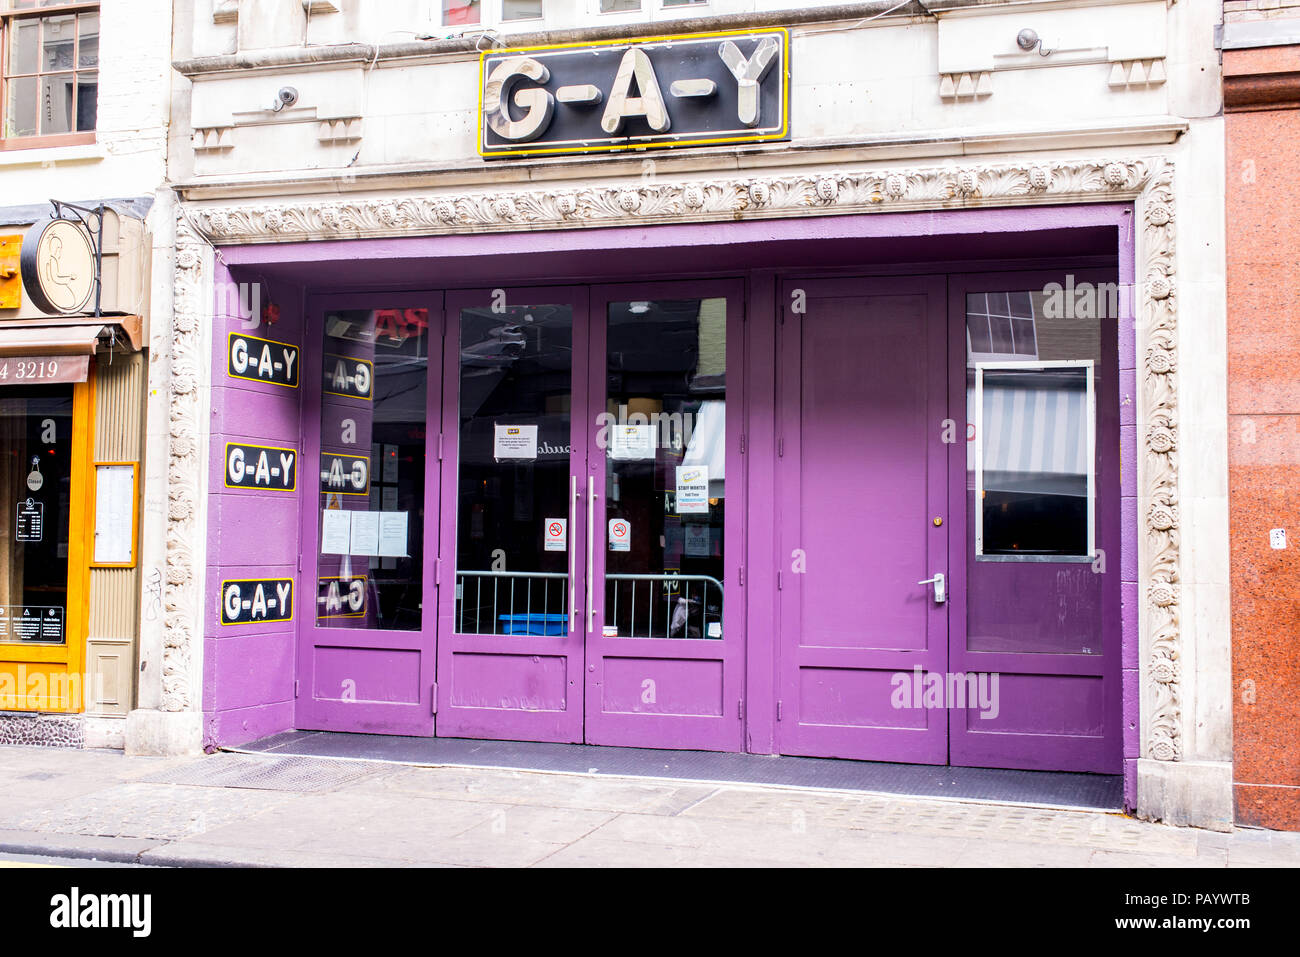 G-A-Y Bar in Soho, a very popular Gay bar venue in London. Many of London's gay bars are clustered around Soho, the traditional centre of London's LGB Stock Photo